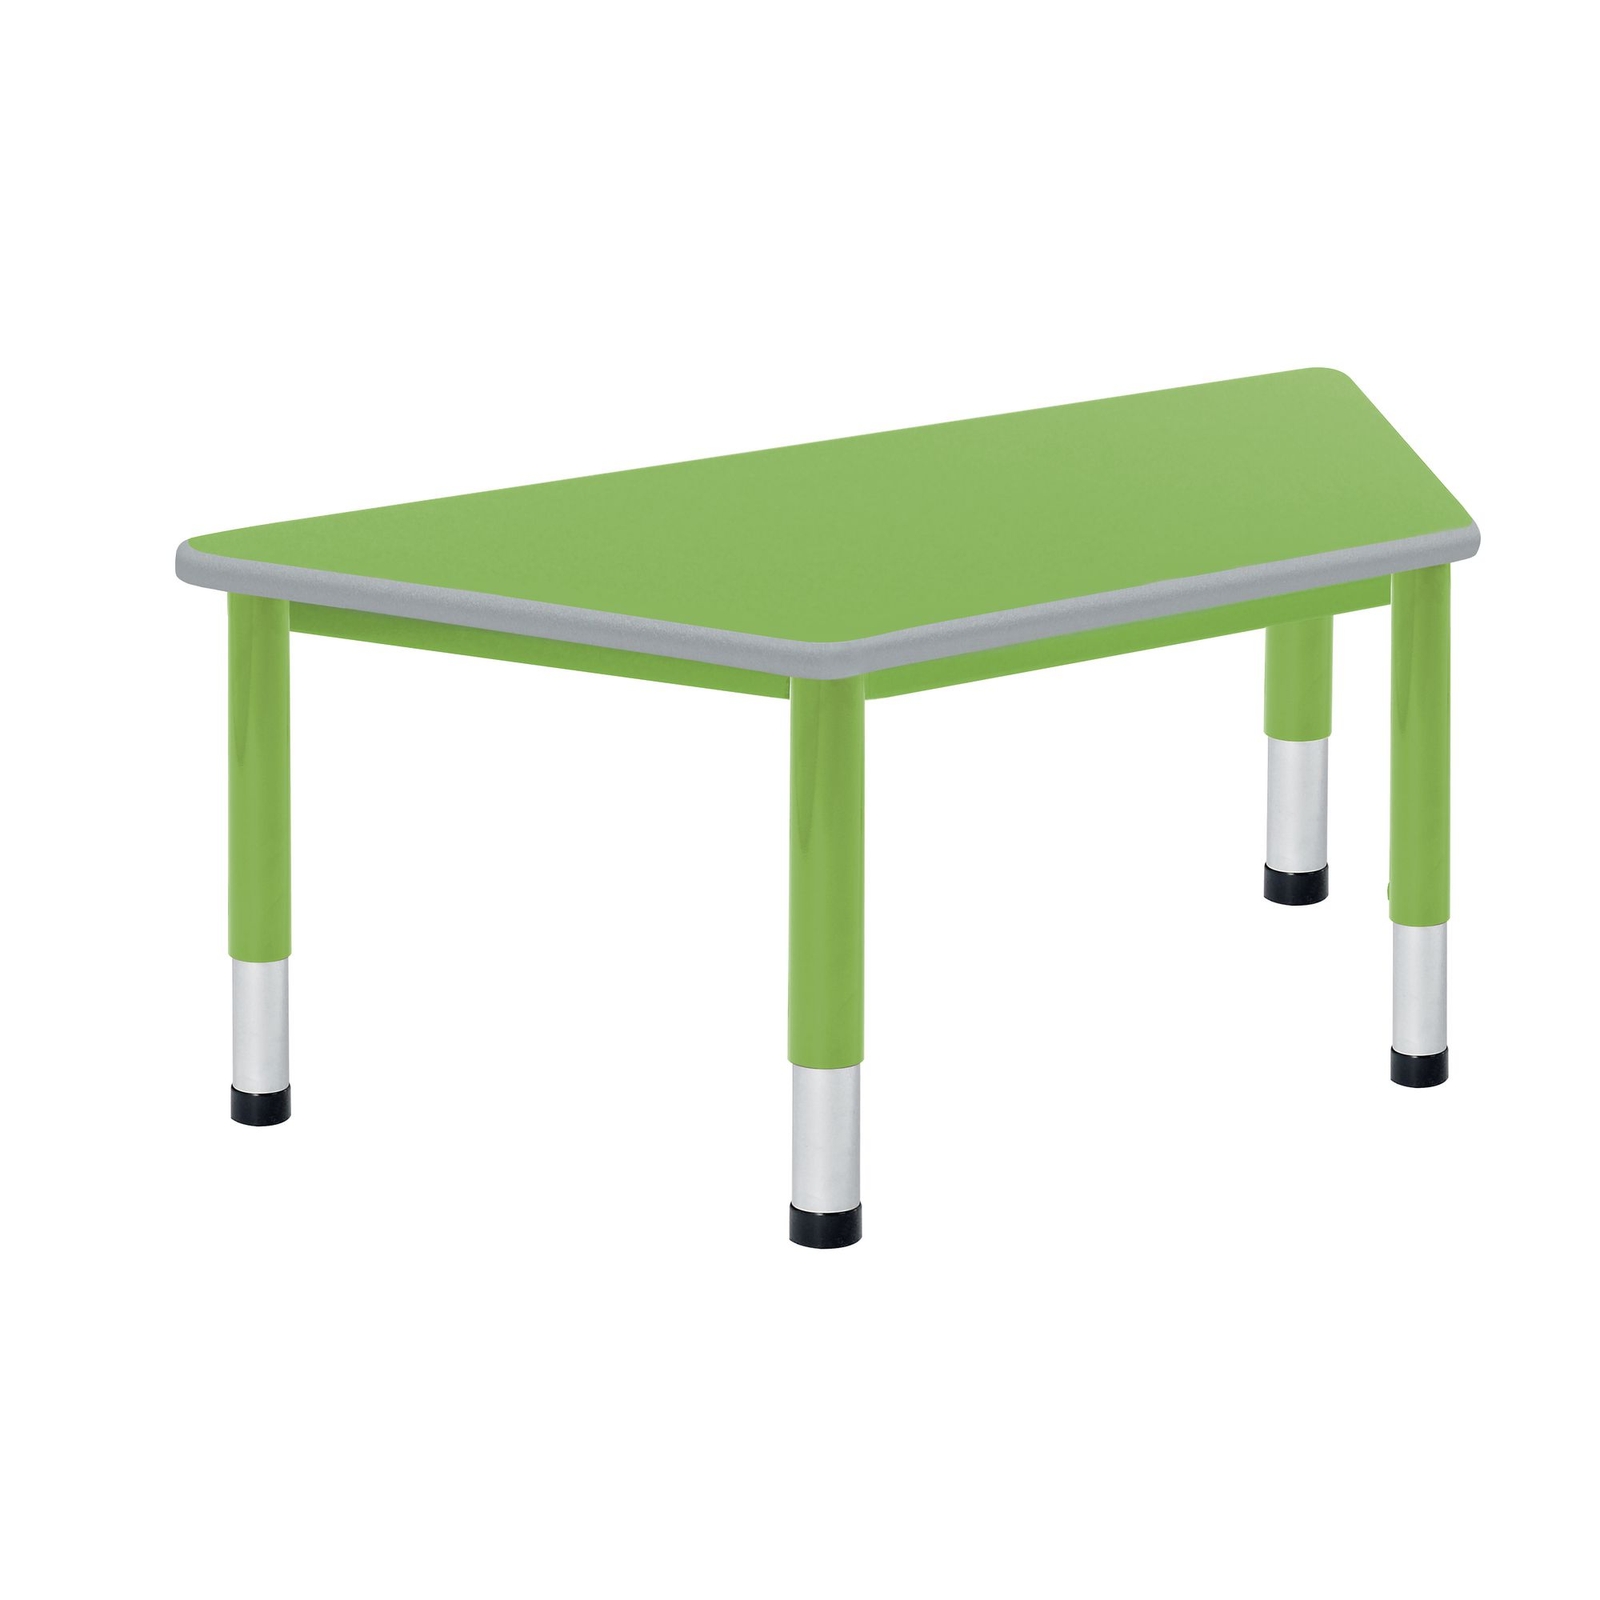 Harlequin Tangy Lime Trapezoidal Height Adjustable Steel Classroom Table - 1200 x 600 x 400 to 640mm - Each